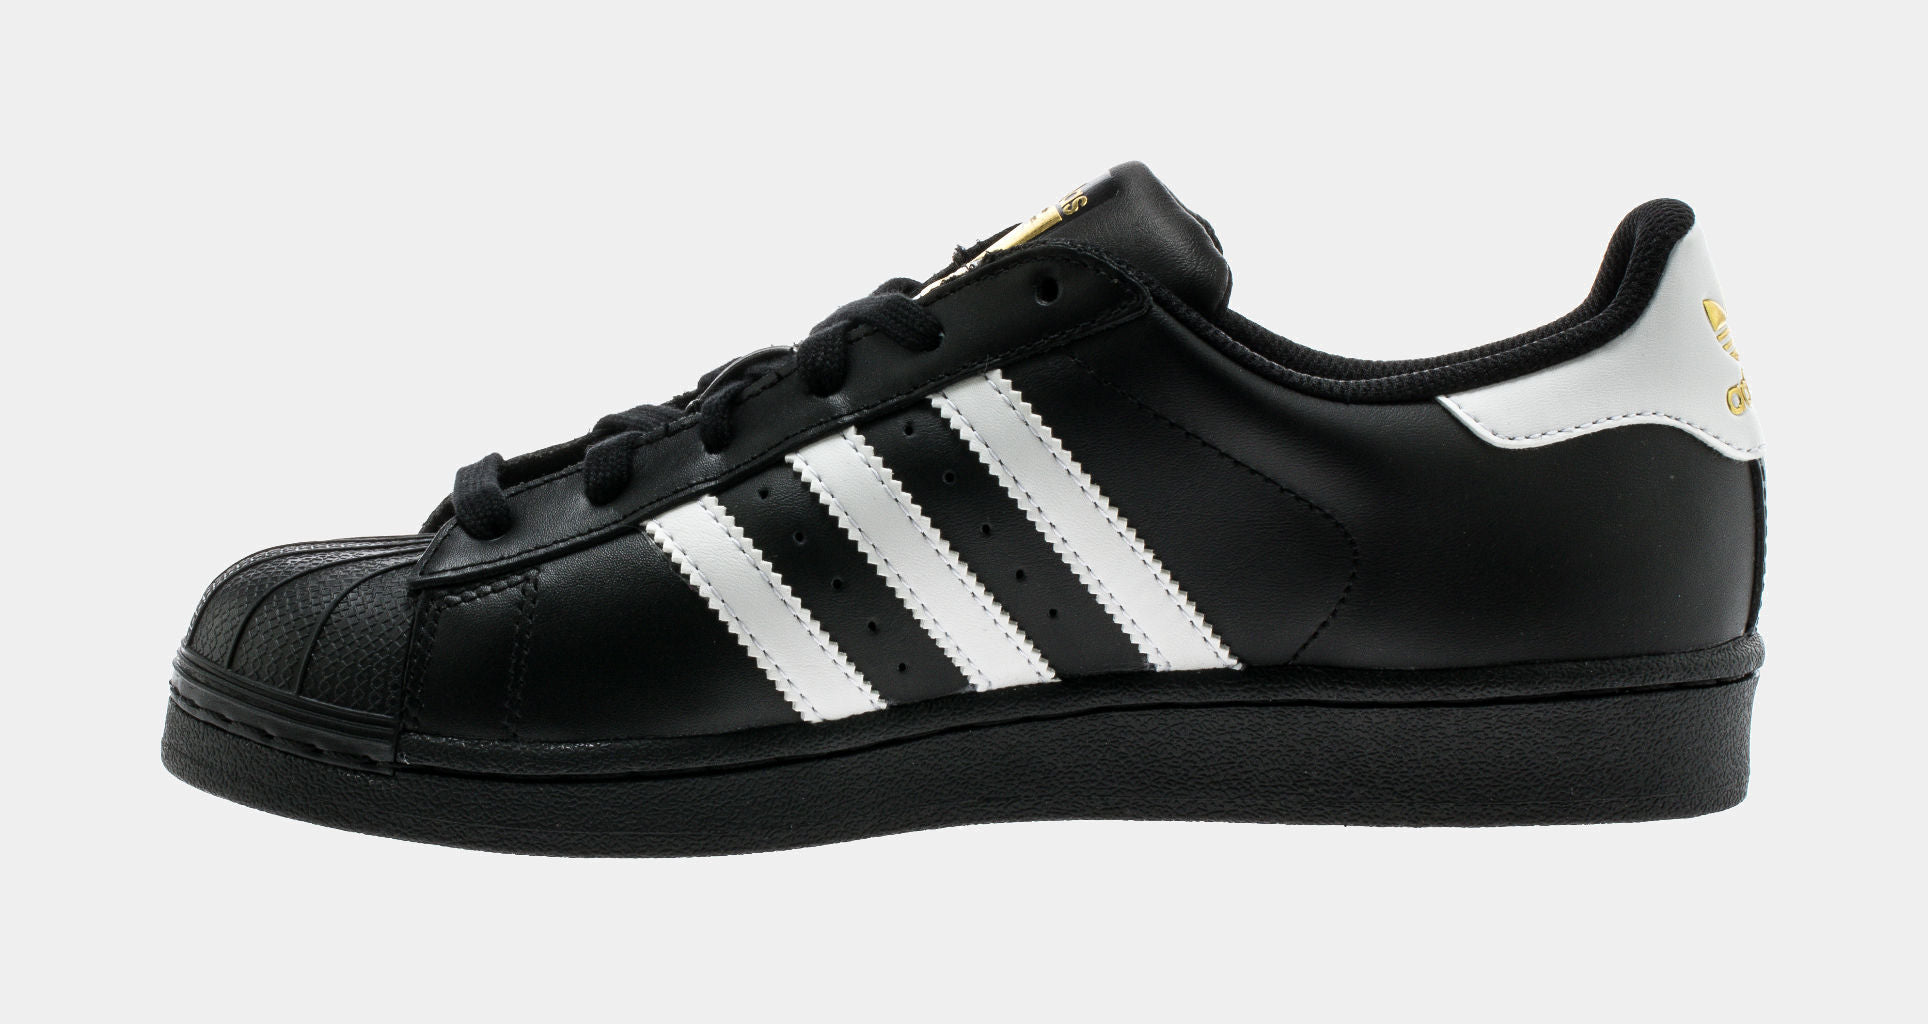 London, England, 05/05/2018 Adidas Superstar Shell Toe Originals Hip Hop  Style Vintage Sneaker Trainers. All Black Adidas Superstar Trainers,  Stylish Retro New York Street Fashion. Stock Photo, Picture and Royalty  Free Image.